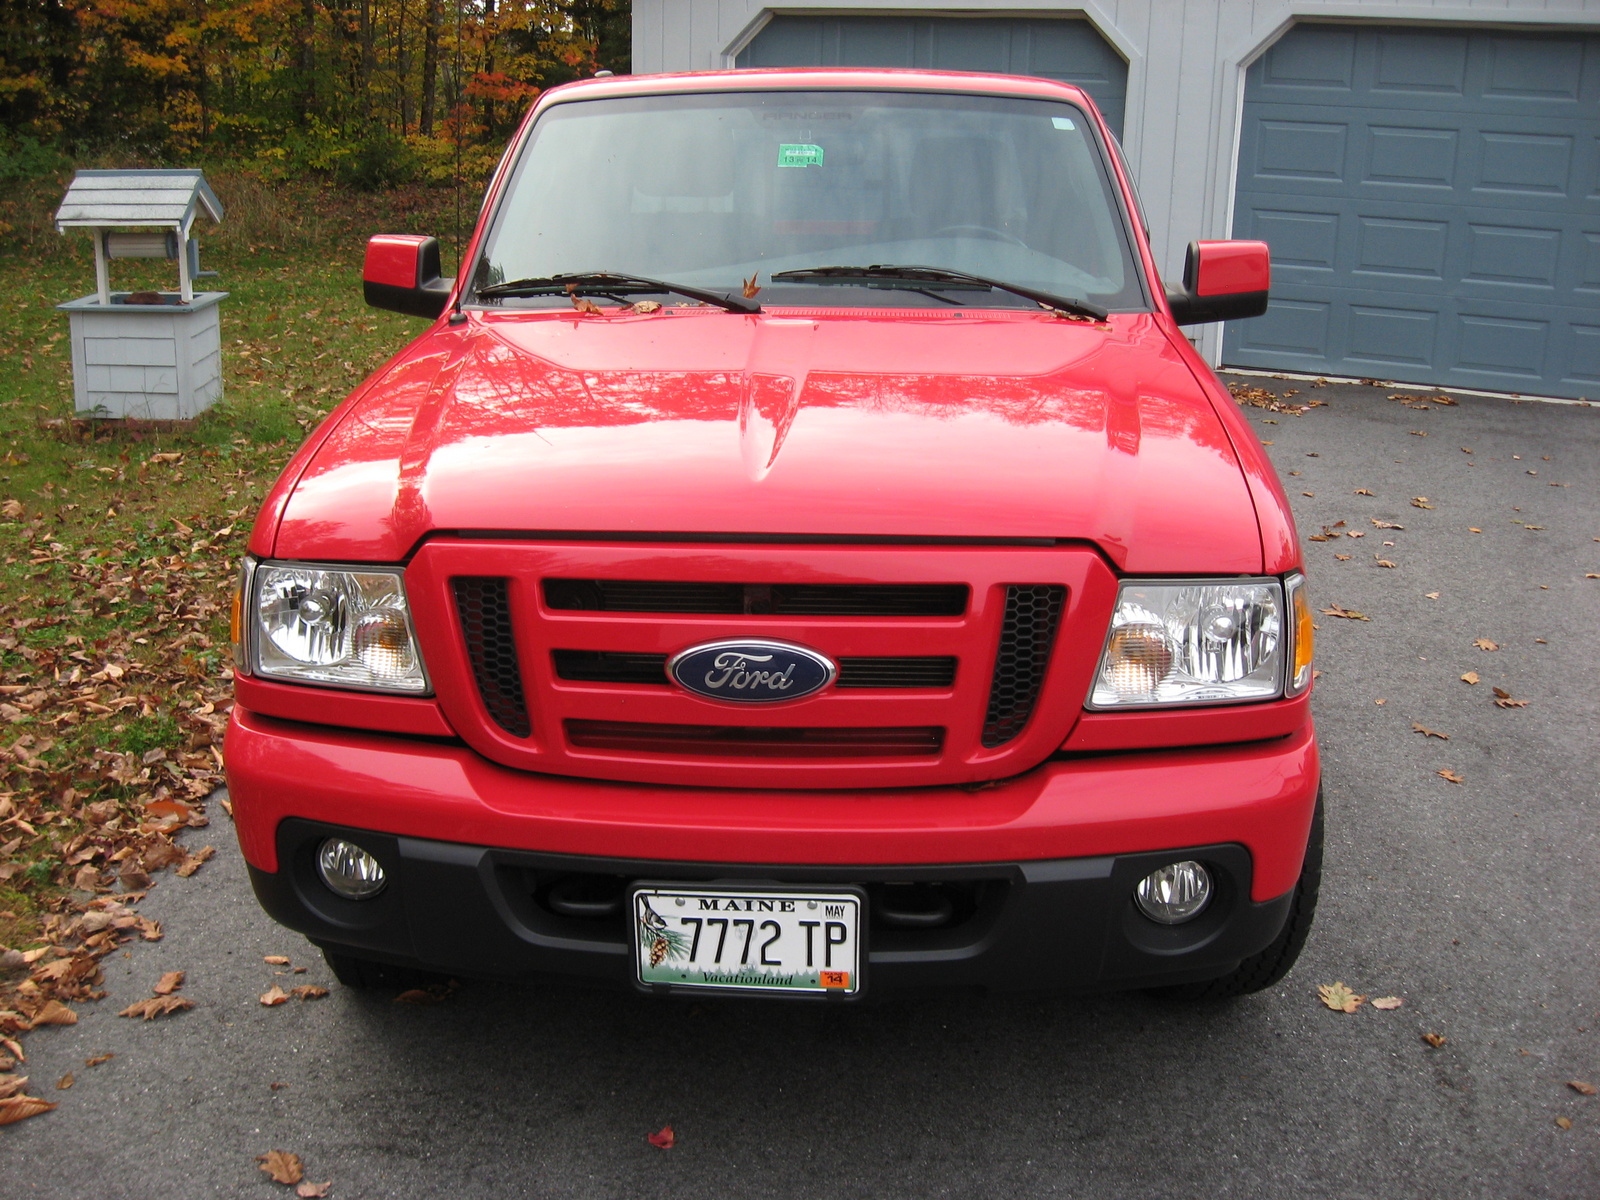 2010 Ford ranger max payload #7